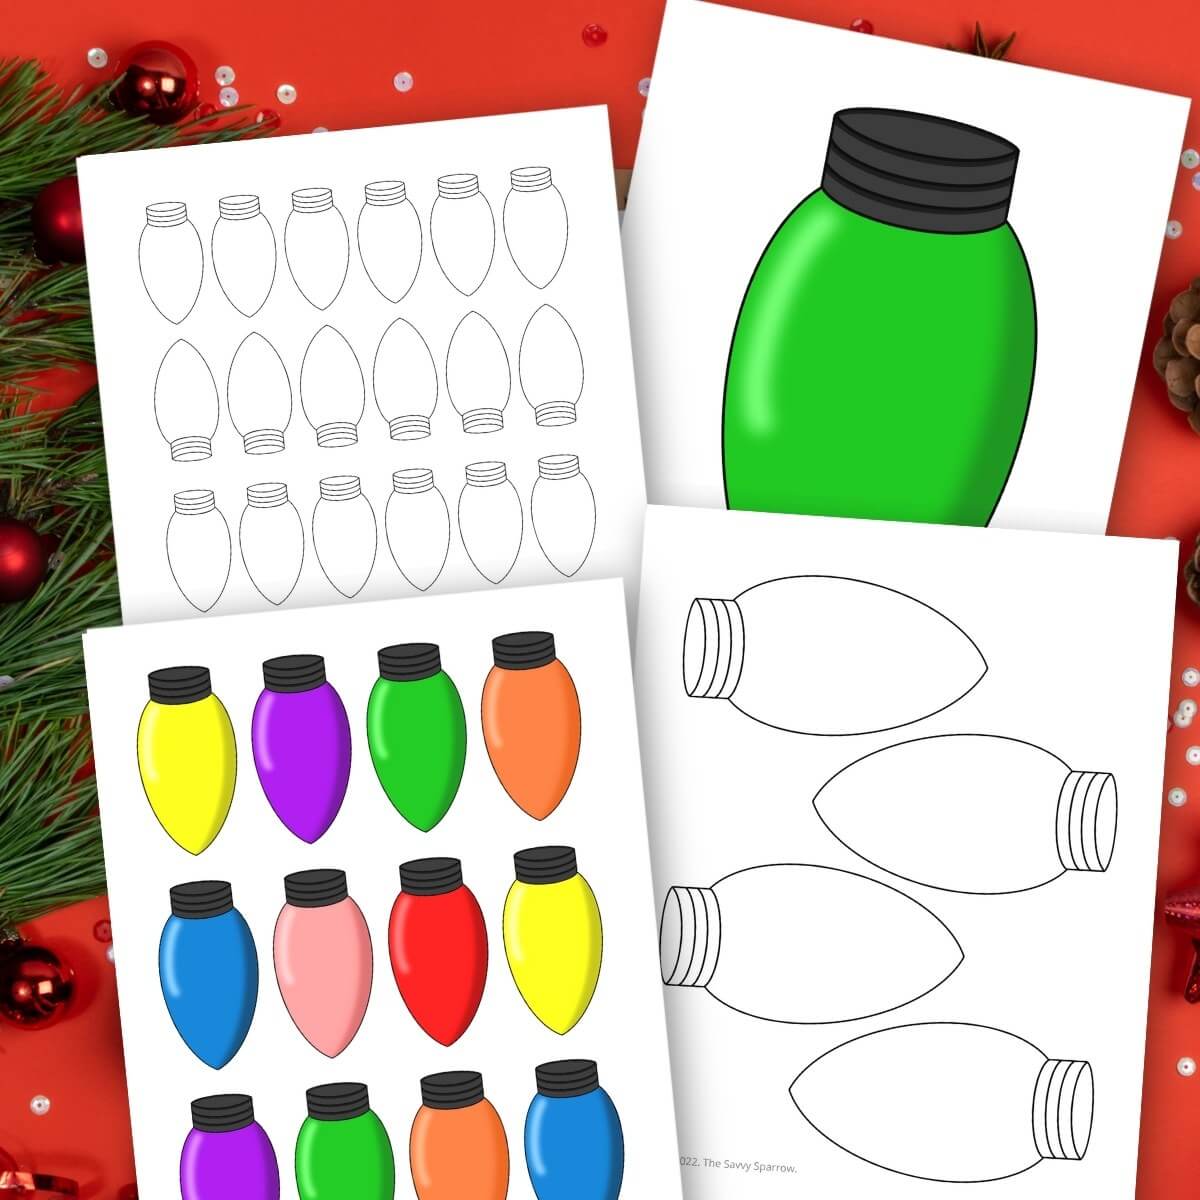 free-christmas-light-template-printable-for-crafts-garlands-etc